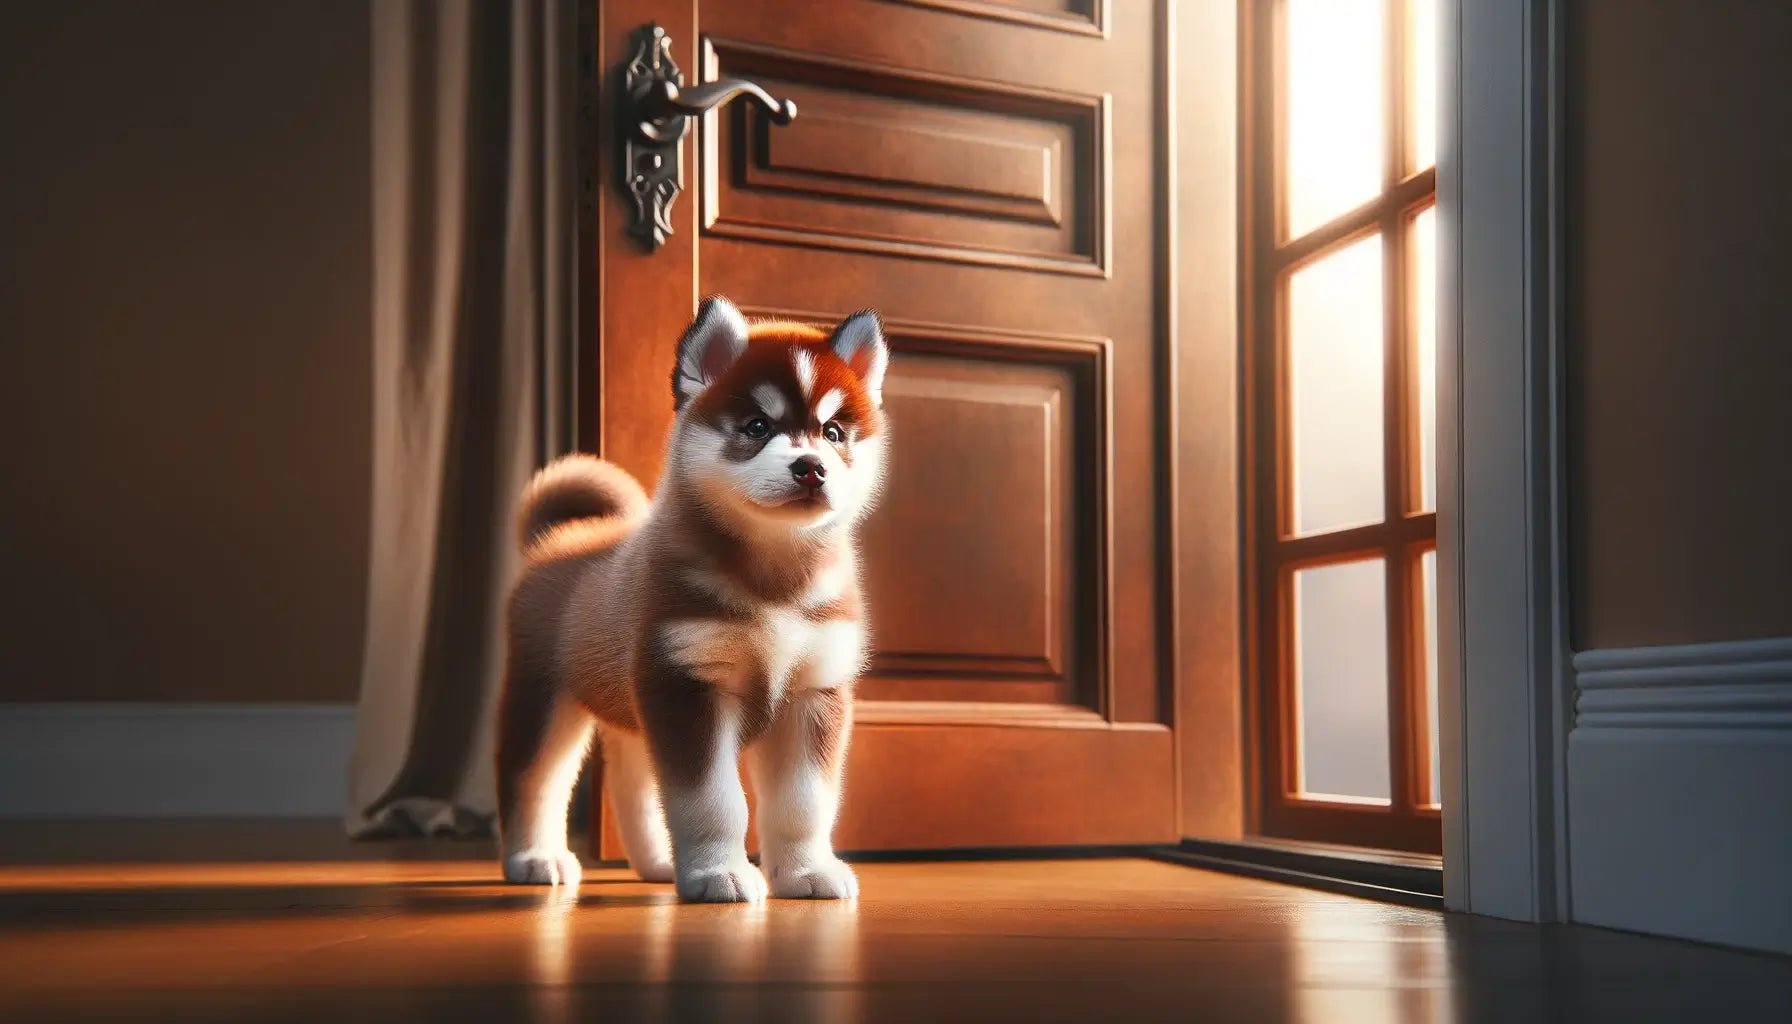 Image showing a confident Red Husky puppy standing by a large door, its compact size contrasted with the door's imposing features.